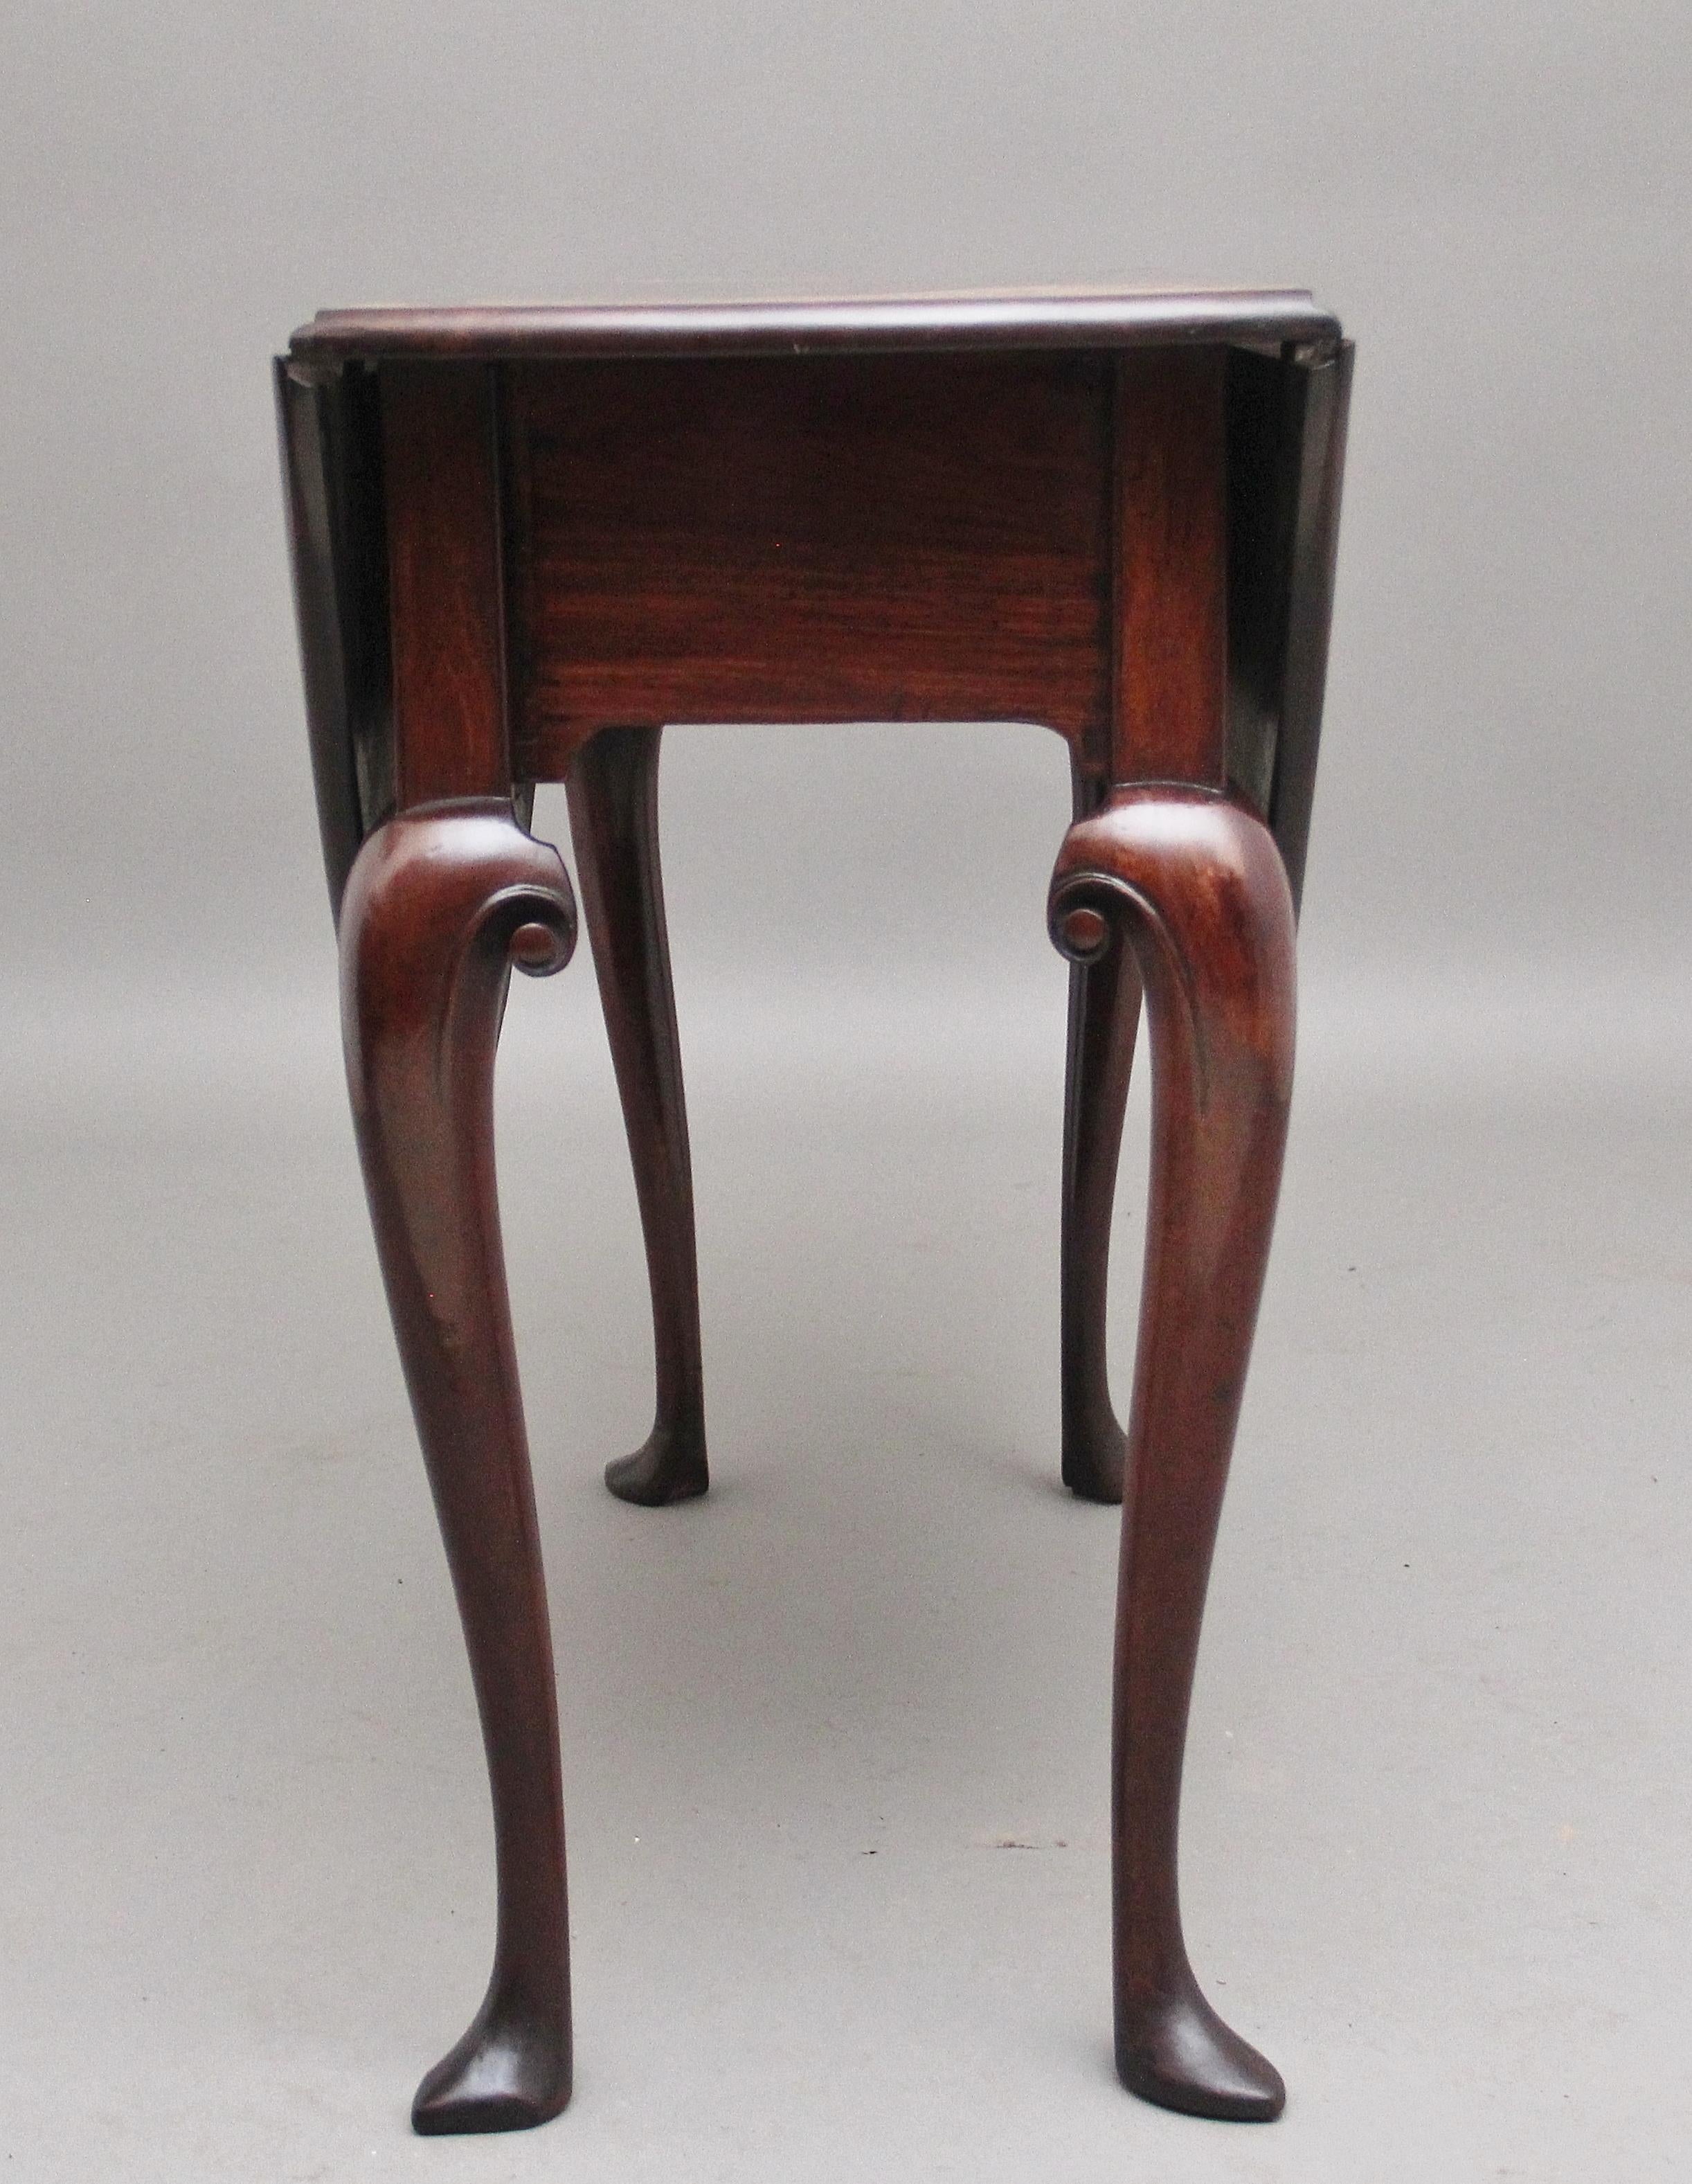 British 18th Century Mahogany Drop Leaf Table from the Georgian Period